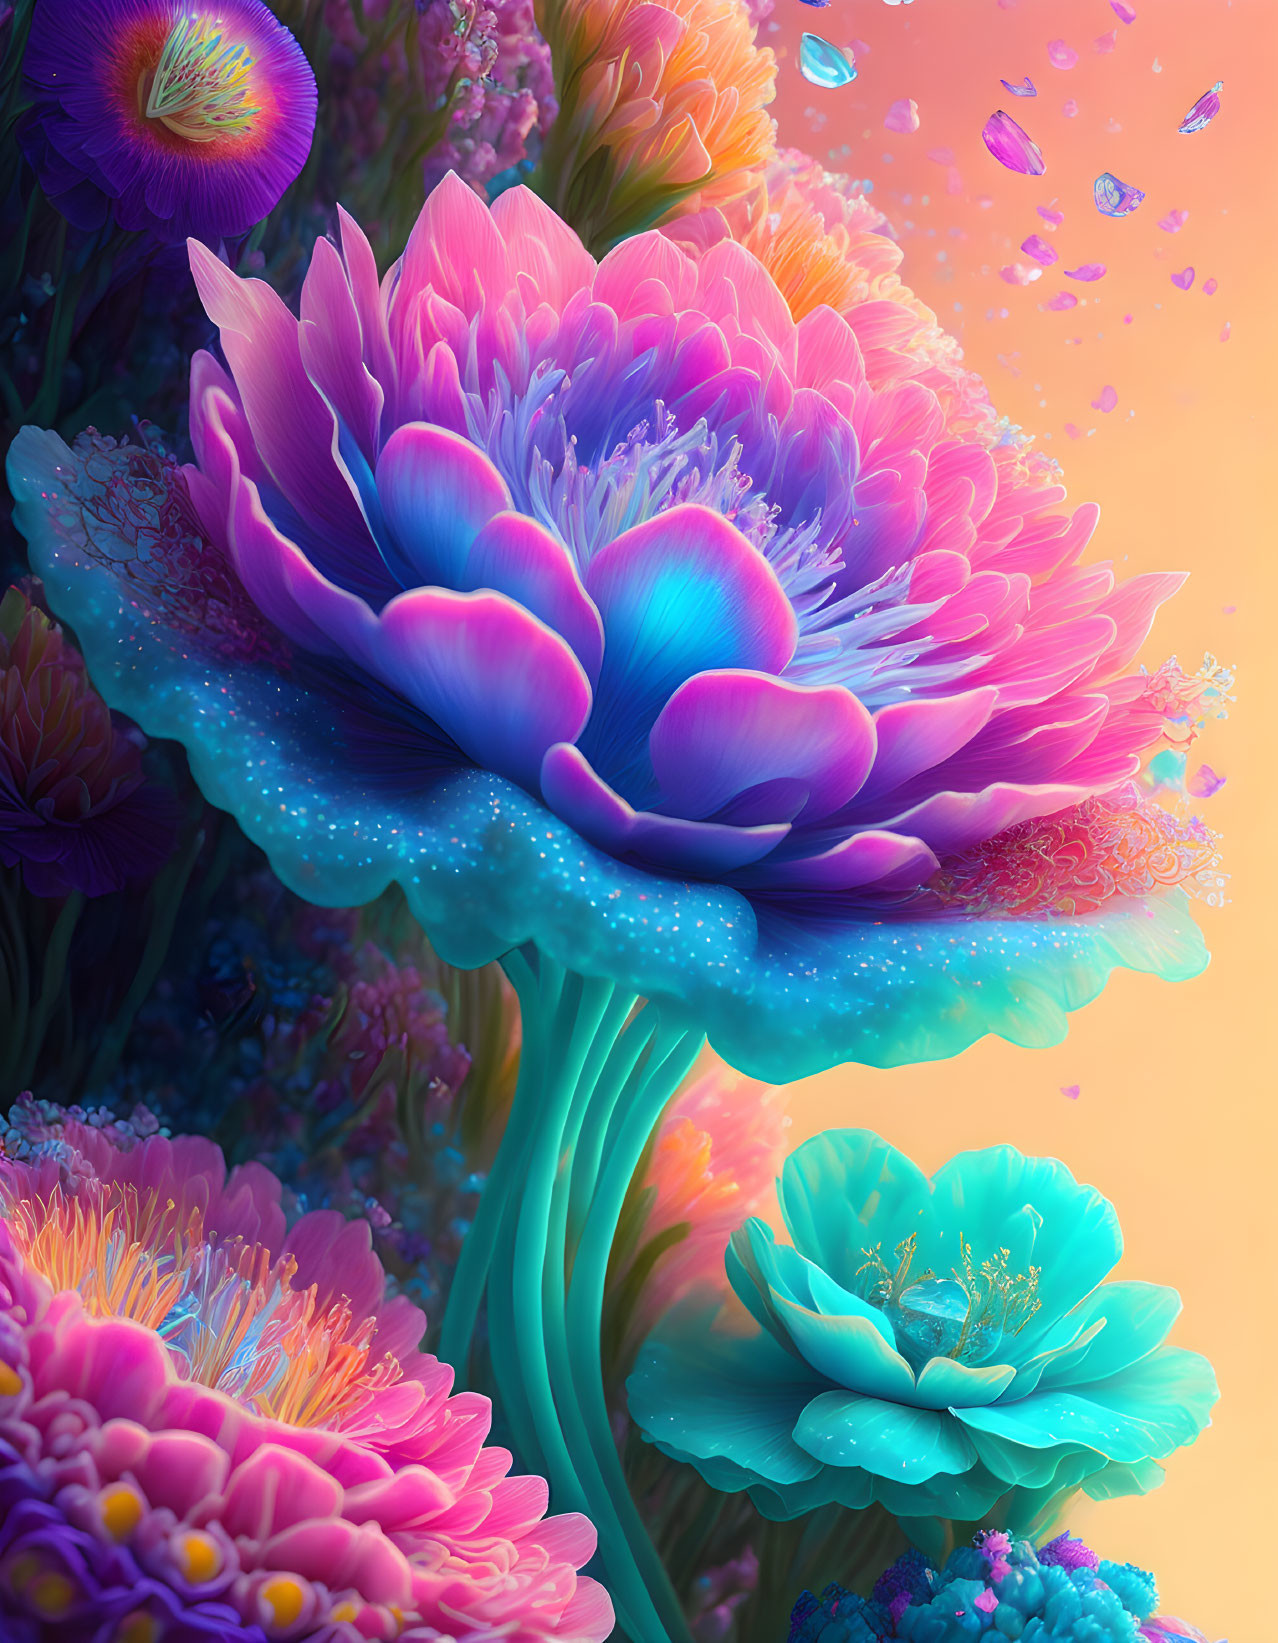 Colorful Stylized Flower Digital Artwork with Glowing Edges